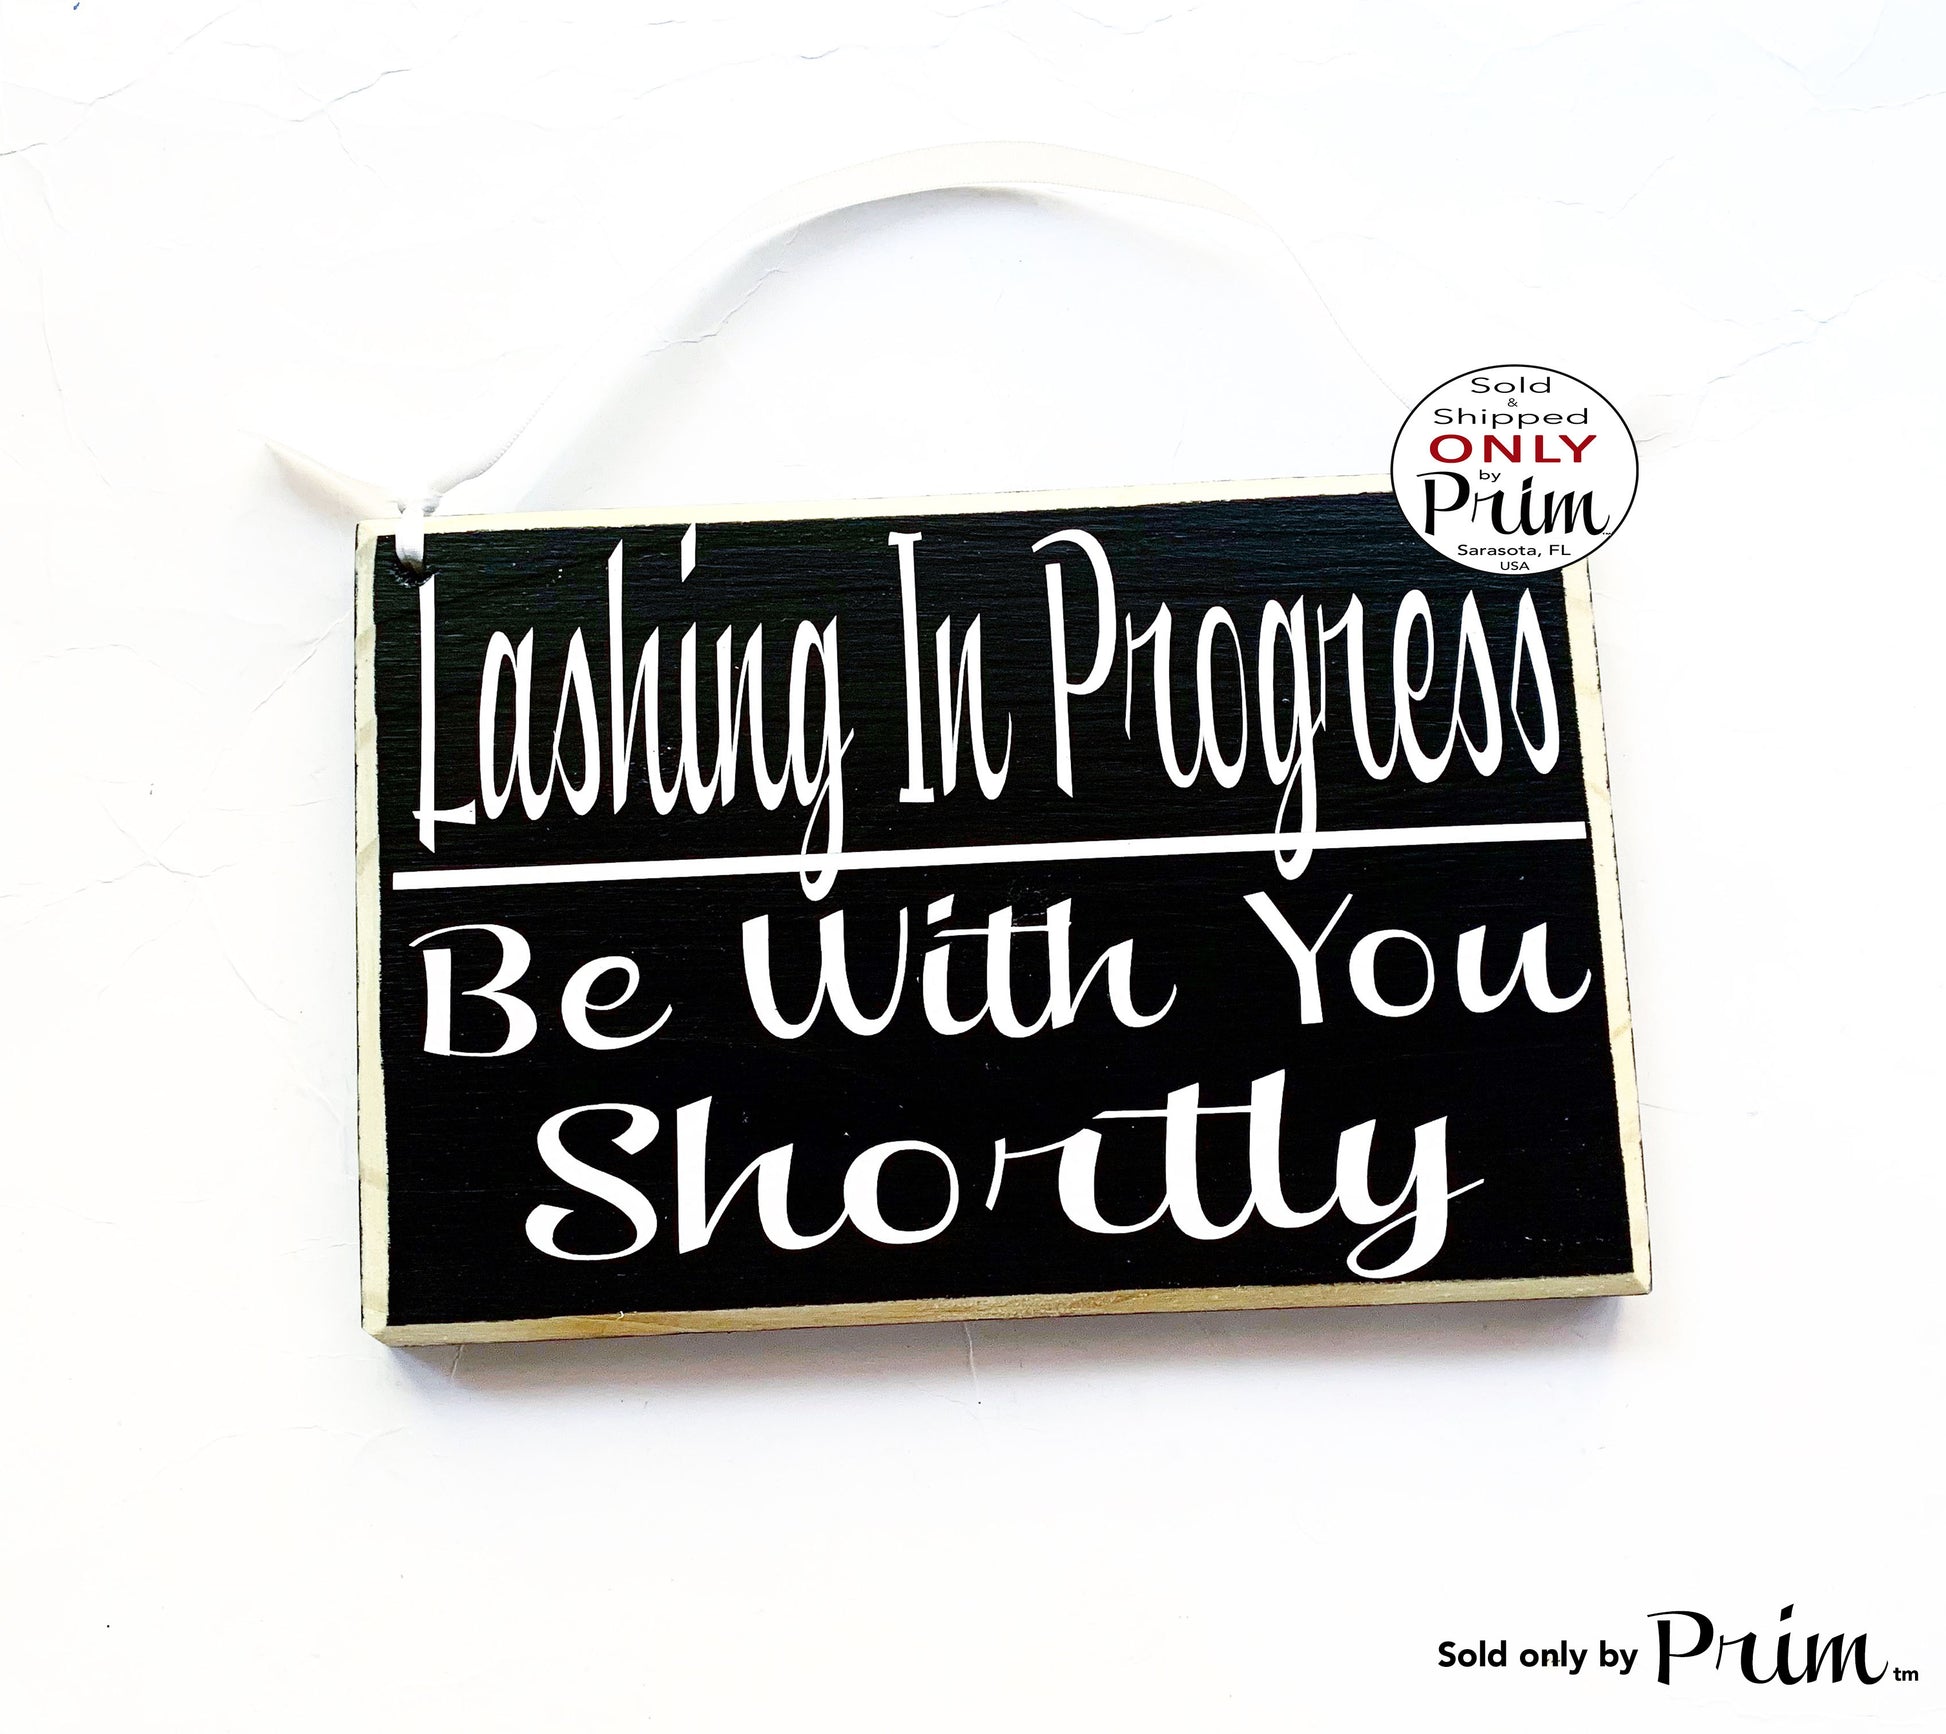 8x6 Lashing In Progress Be With You Shortly Custom Wood Sign | In Session Please Do Not Disturb Lashes Extensions Eyebrows Salon Door Plaque